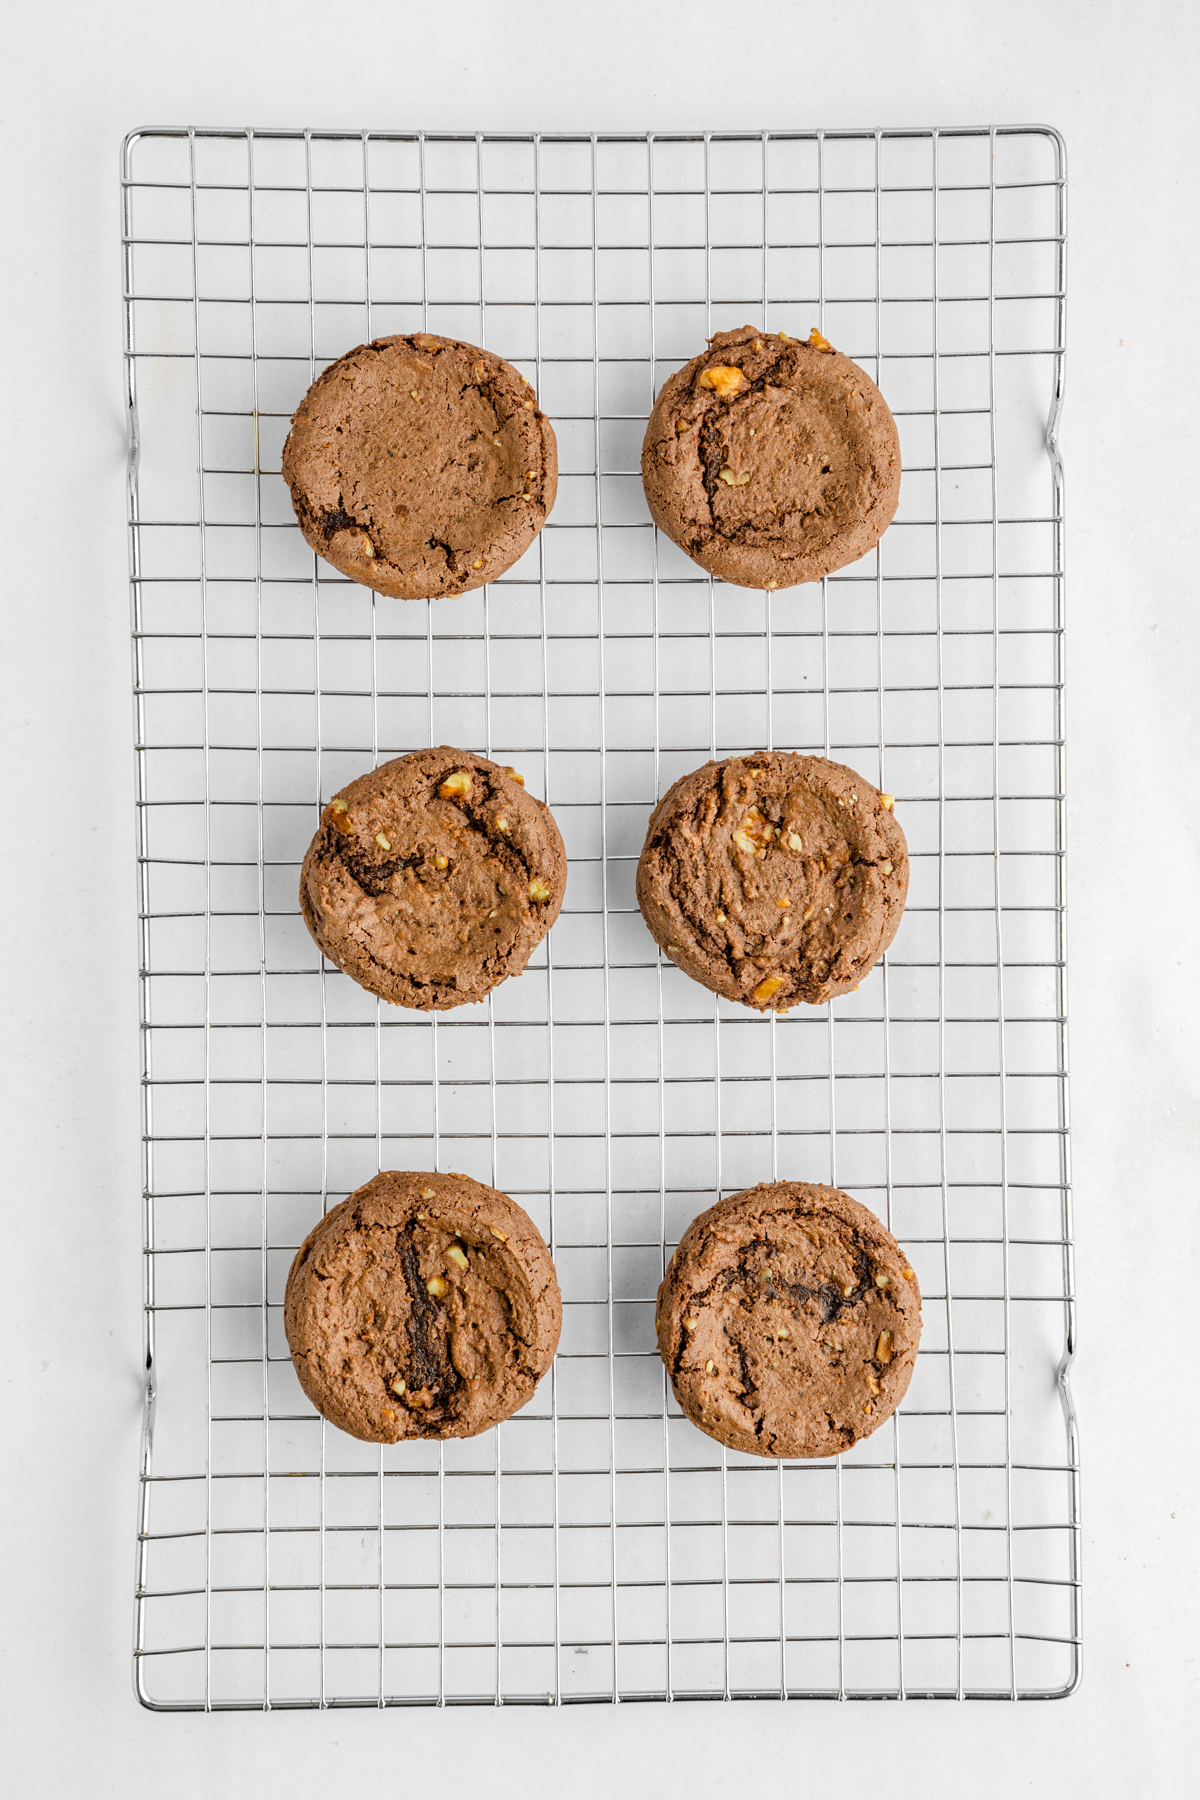 baked chocolate cookies on a cooling rack